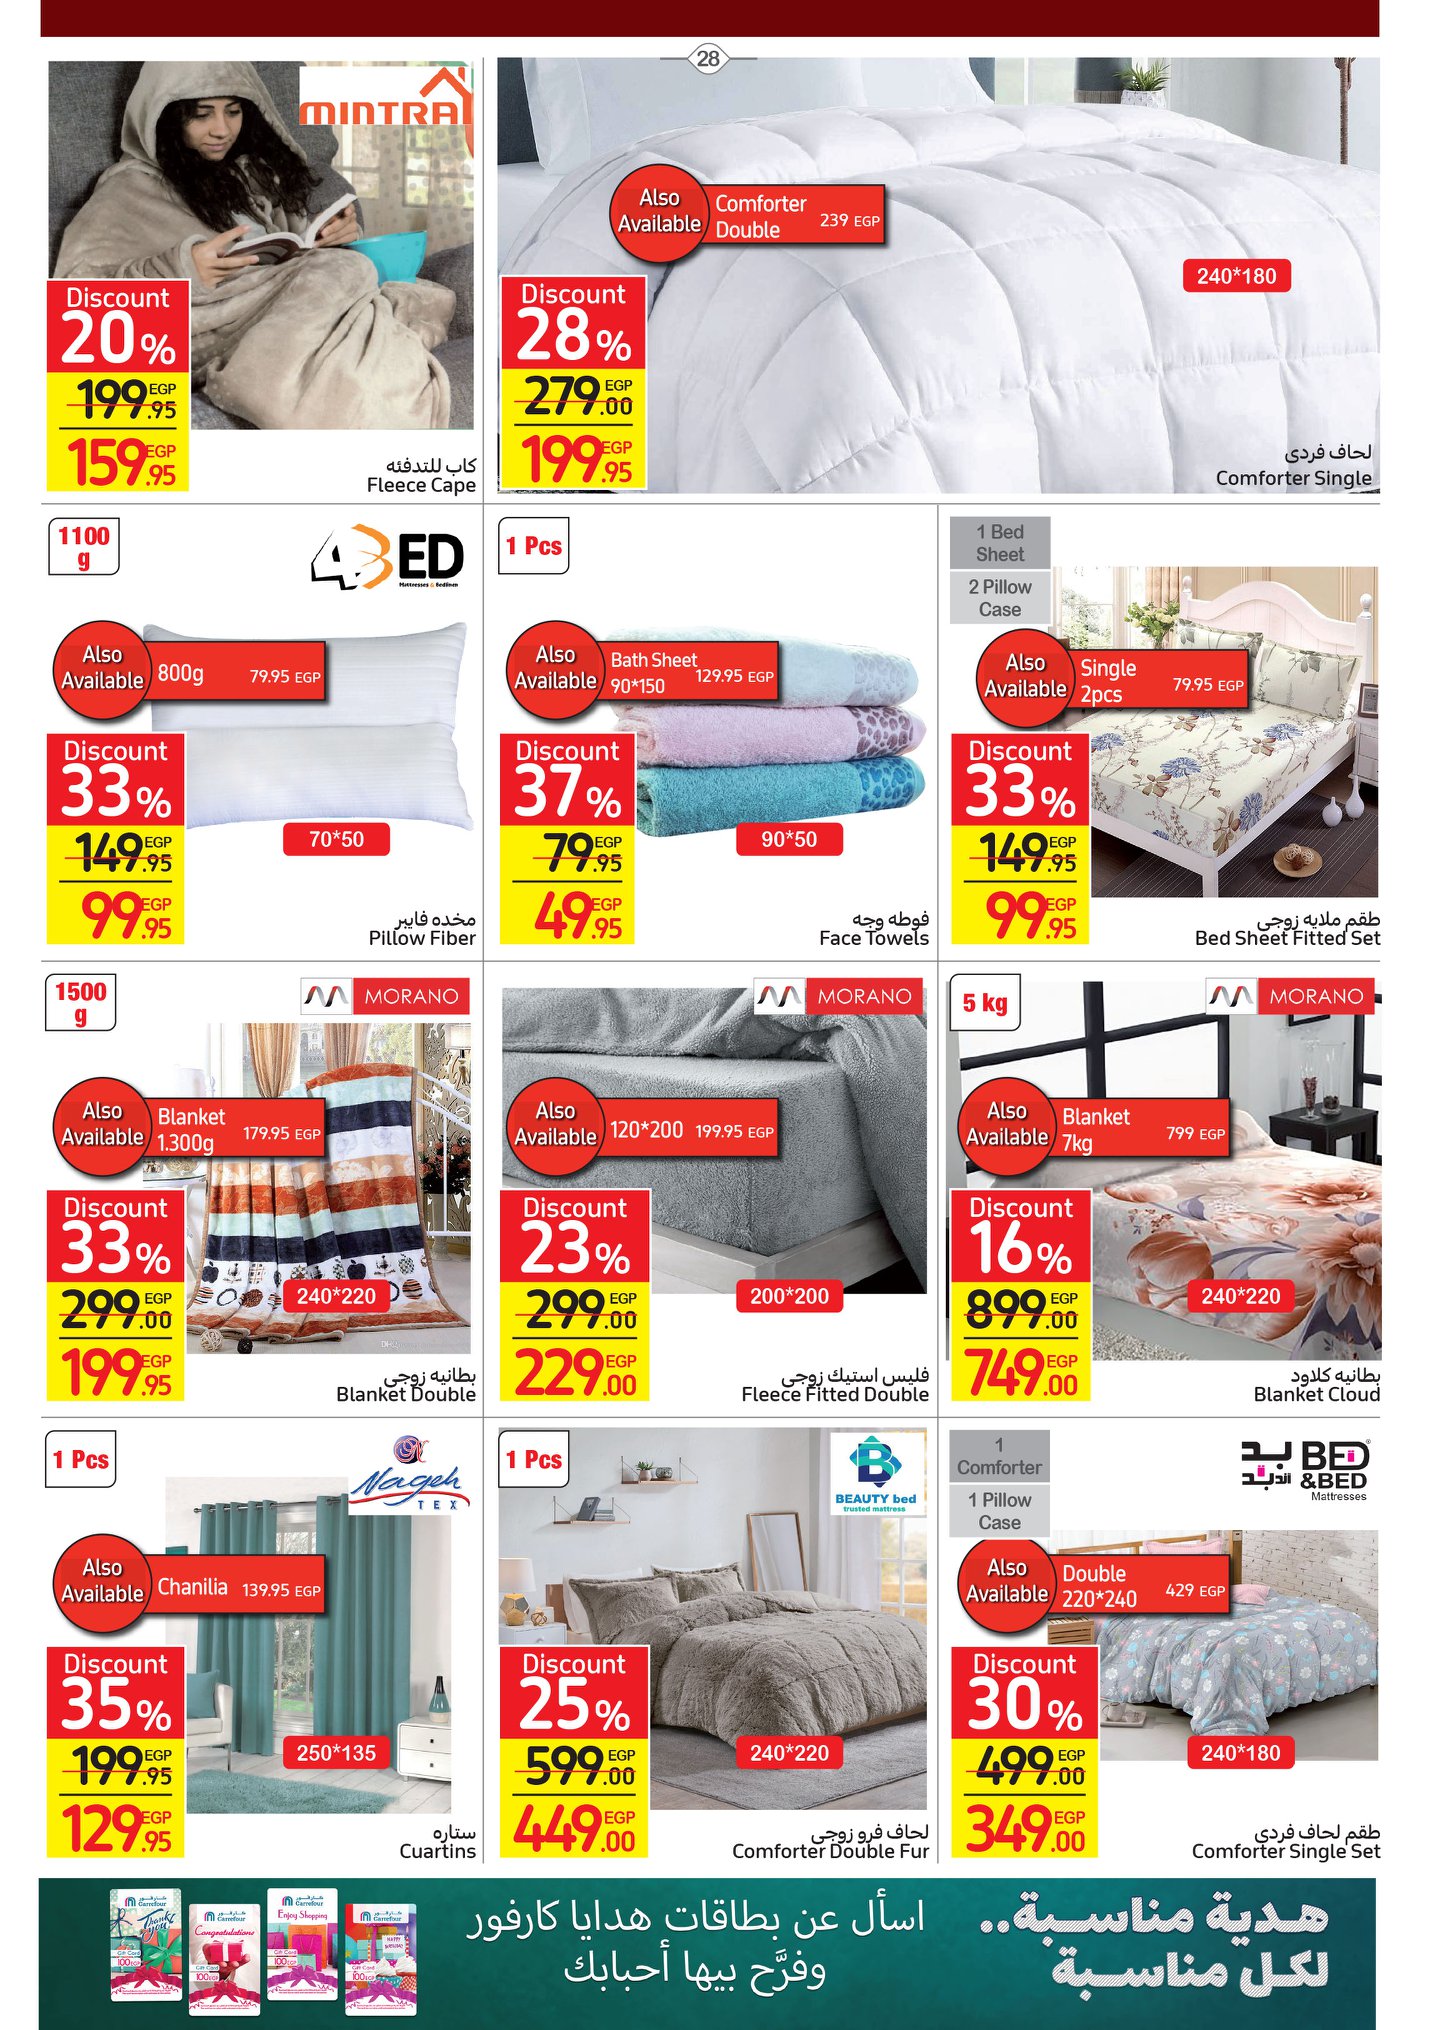 Carrefour offers complete magazine with 50% discounts and a surprise purchase in convenient installments without interest 33